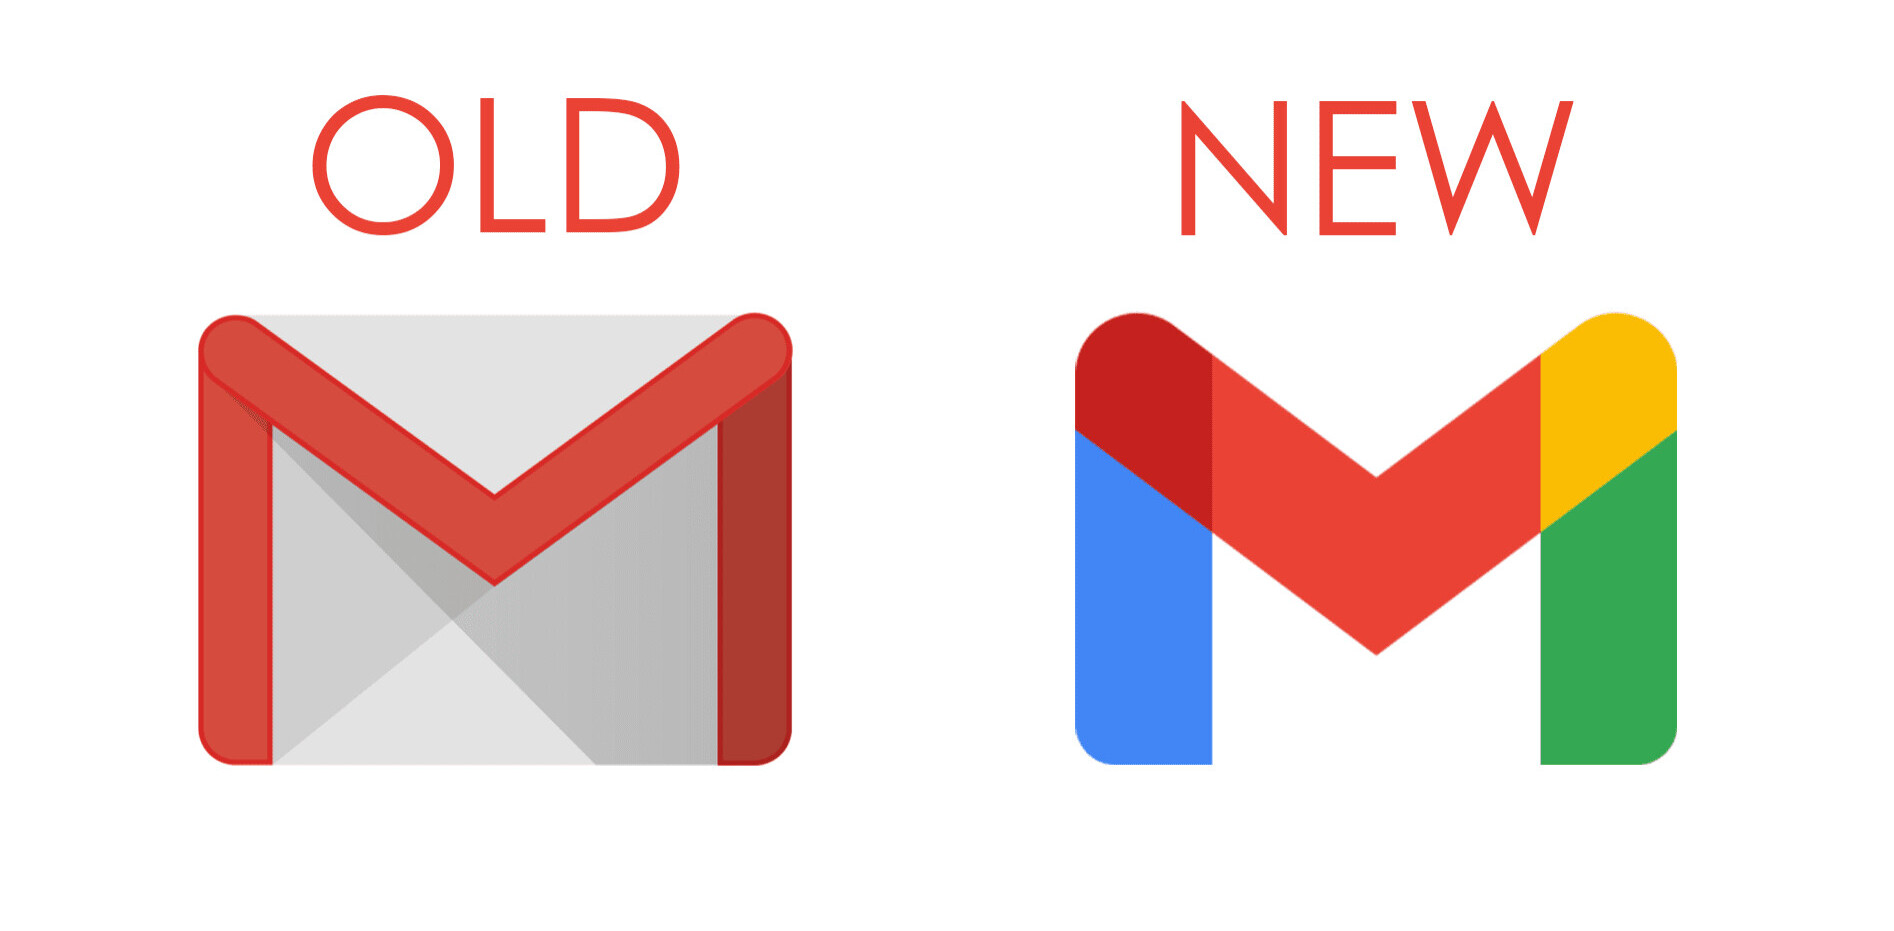 Gmail has a colorful new logo, but I’m going to miss the old envelope